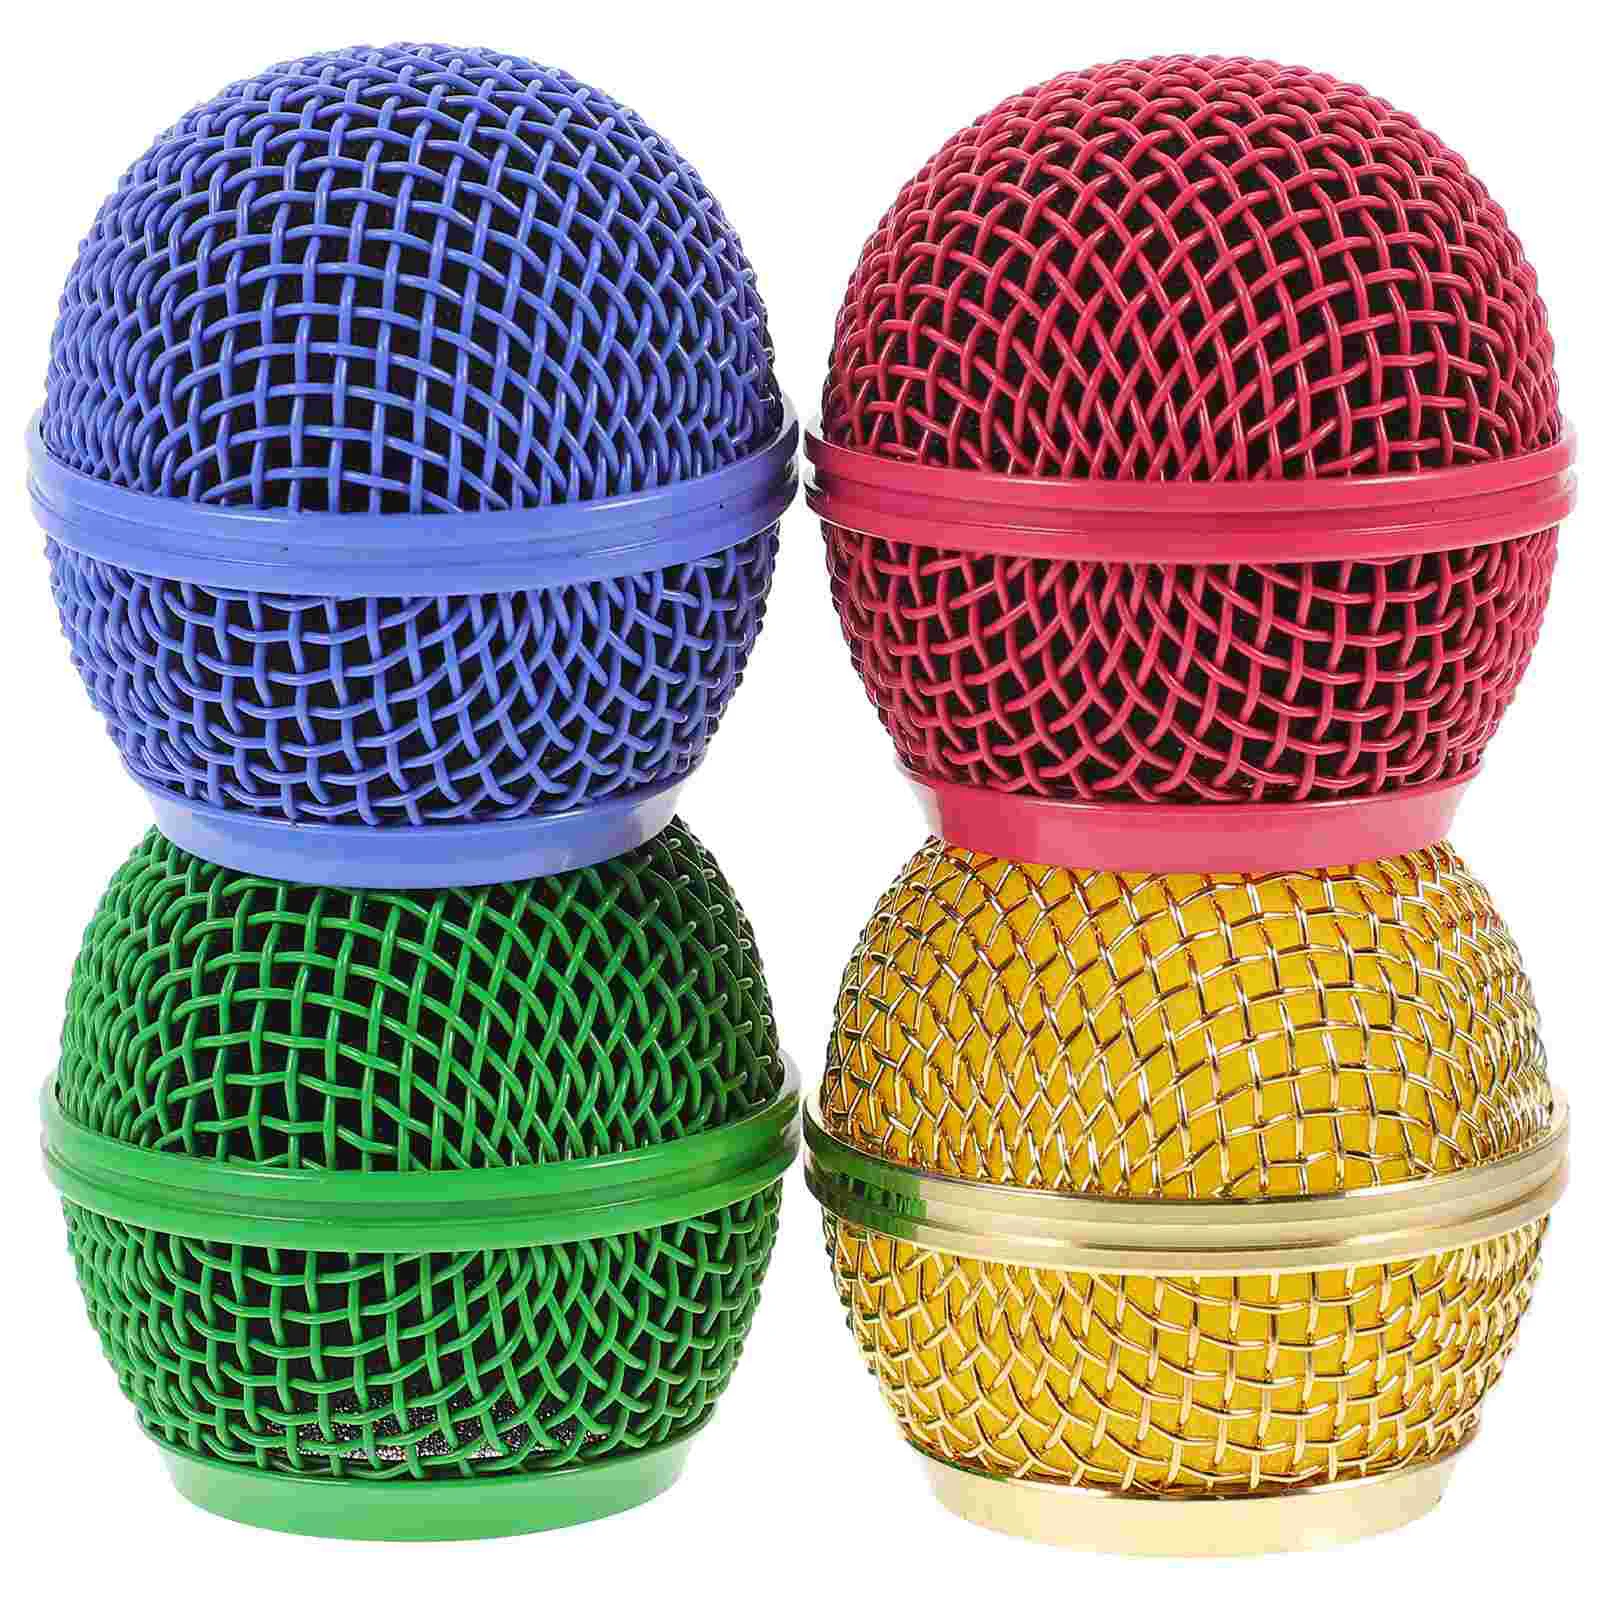 

4 Pcs Colored Microphone Accessories Cover Head Mesh Windscreen Wireless Microphones Metal Replacement Grille for